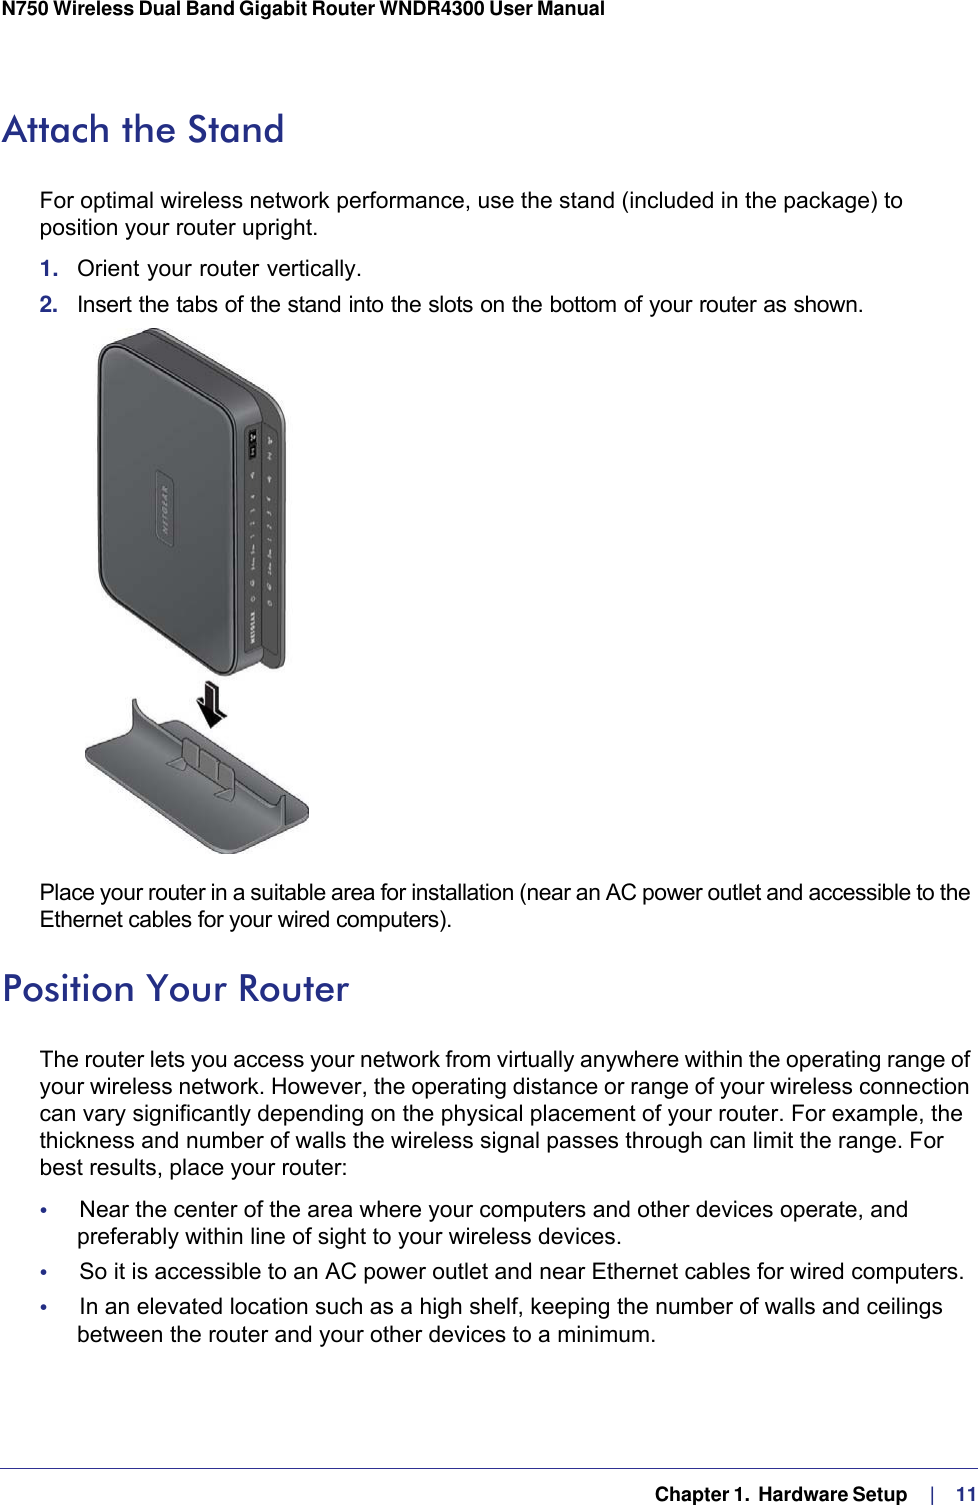   Chapter 1.  Hardware Setup     |    11N750 Wireless Dual Band Gigabit Router WNDR4300 User Manual Attach the StandFor optimal wireless network performance, use the stand (included in the package) to position your router upright. 1.  Orient your router vertically.2.  Insert the tabs of the stand into the slots on the bottom of your router as shown. Place your router in a suitable area for installation (near an AC power outlet and accessible to the Ethernet cables for your wired computers). Position Your RouterThe router lets you access your network from virtually anywhere within the operating range of your wireless network. However, the operating distance or range of your wireless connection can vary significantly depending on the physical placement of your router. For example, the thickness and number of walls the wireless signal passes through can limit the range. For best results, place your router: •     Near the center of the area where your computers and other devices operate, and preferably within line of sight to your wireless devices.•     So it is accessible to an AC power outlet and near Ethernet cables for wired computers.•     In an elevated location such as a high shelf, keeping the number of walls and ceilings between the router and your other devices to a minimum.